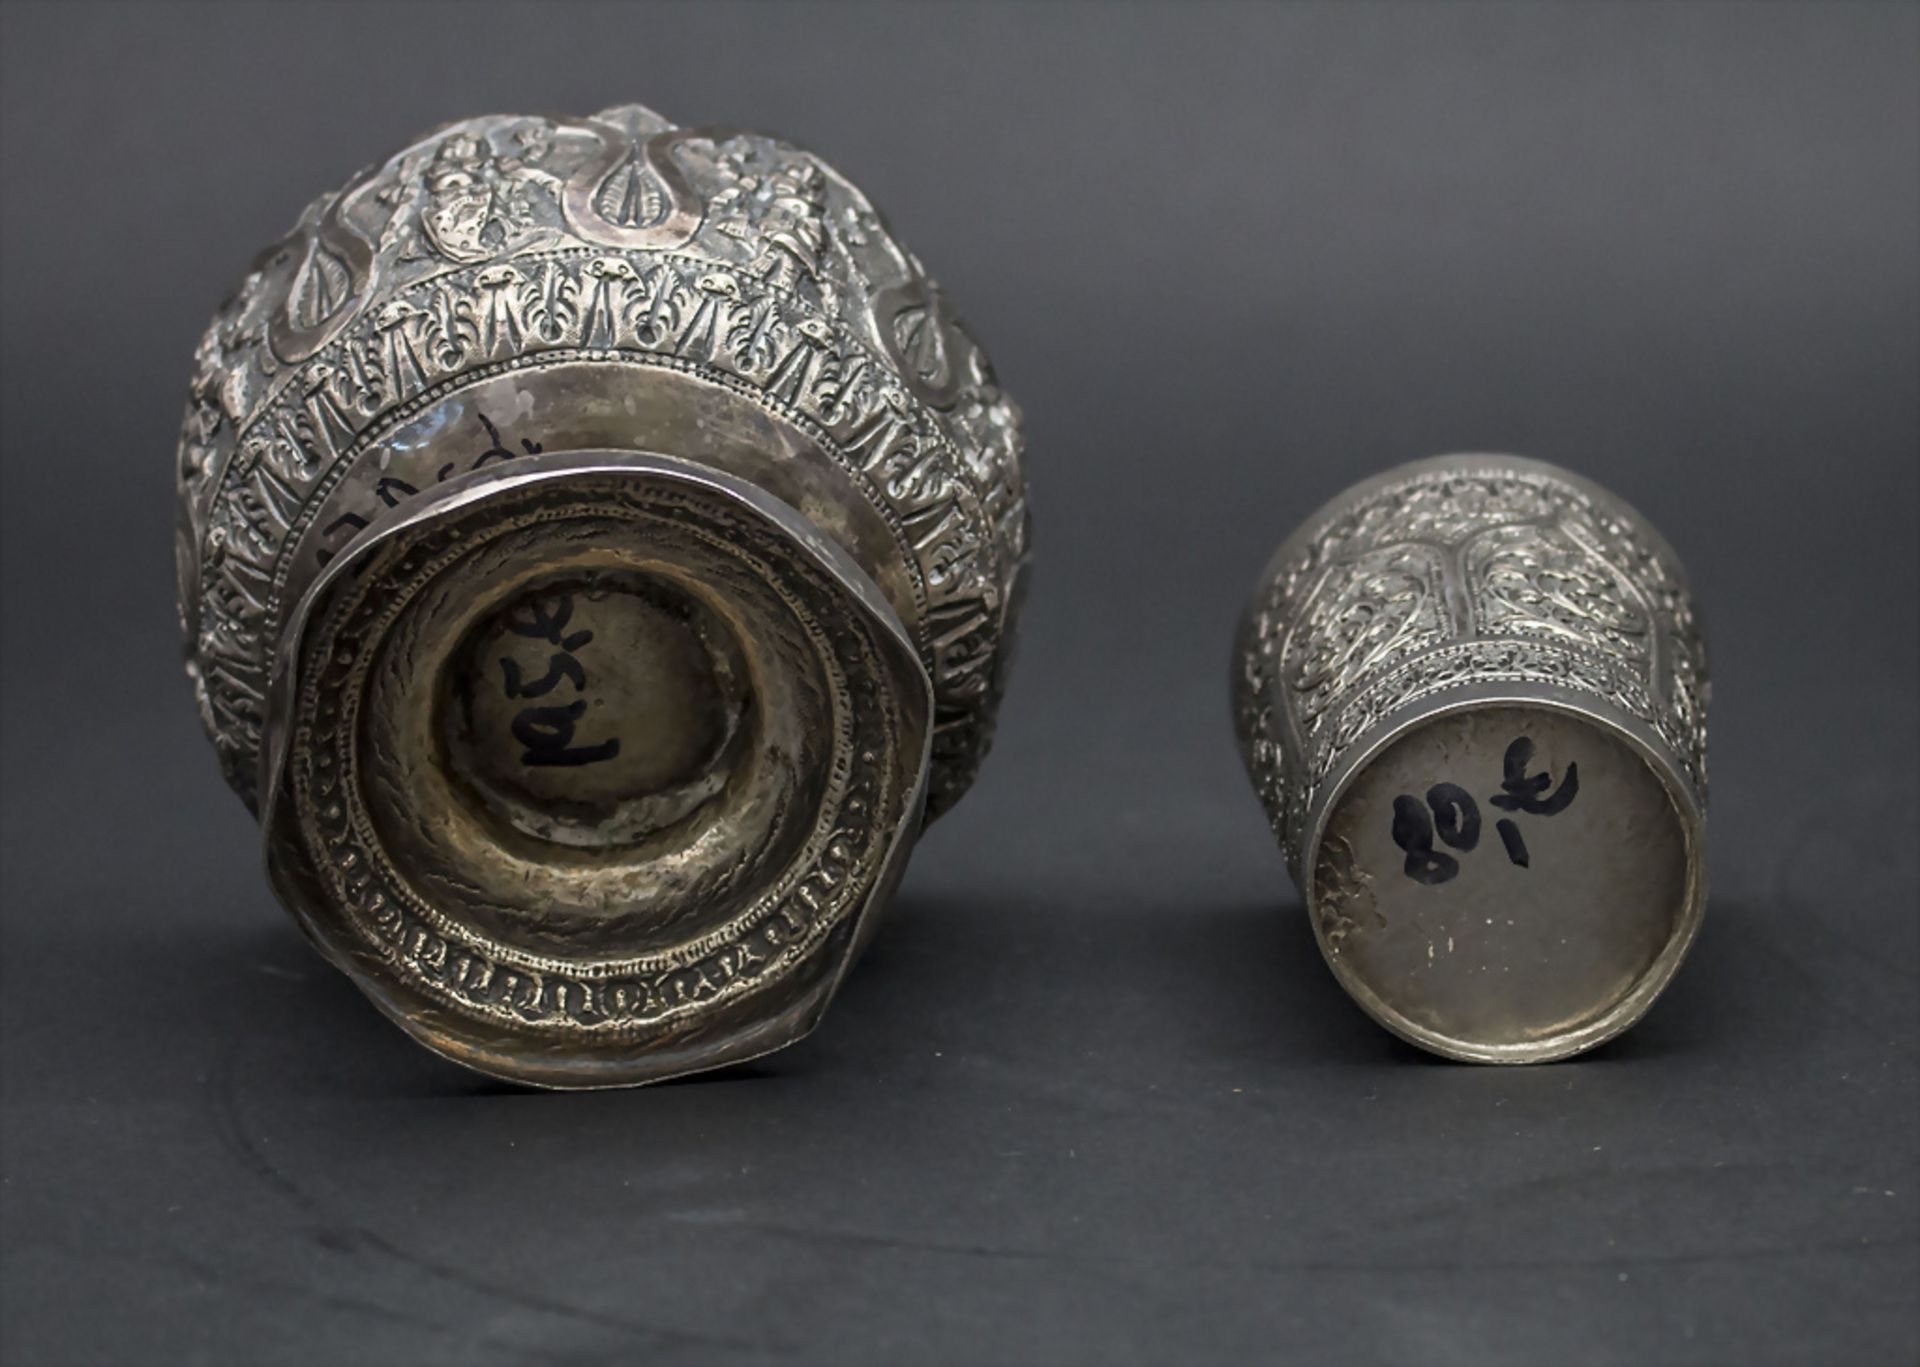 Silber Lotusschale und Becher / A silver lotus bowl and beaker, Thailand - Image 3 of 6